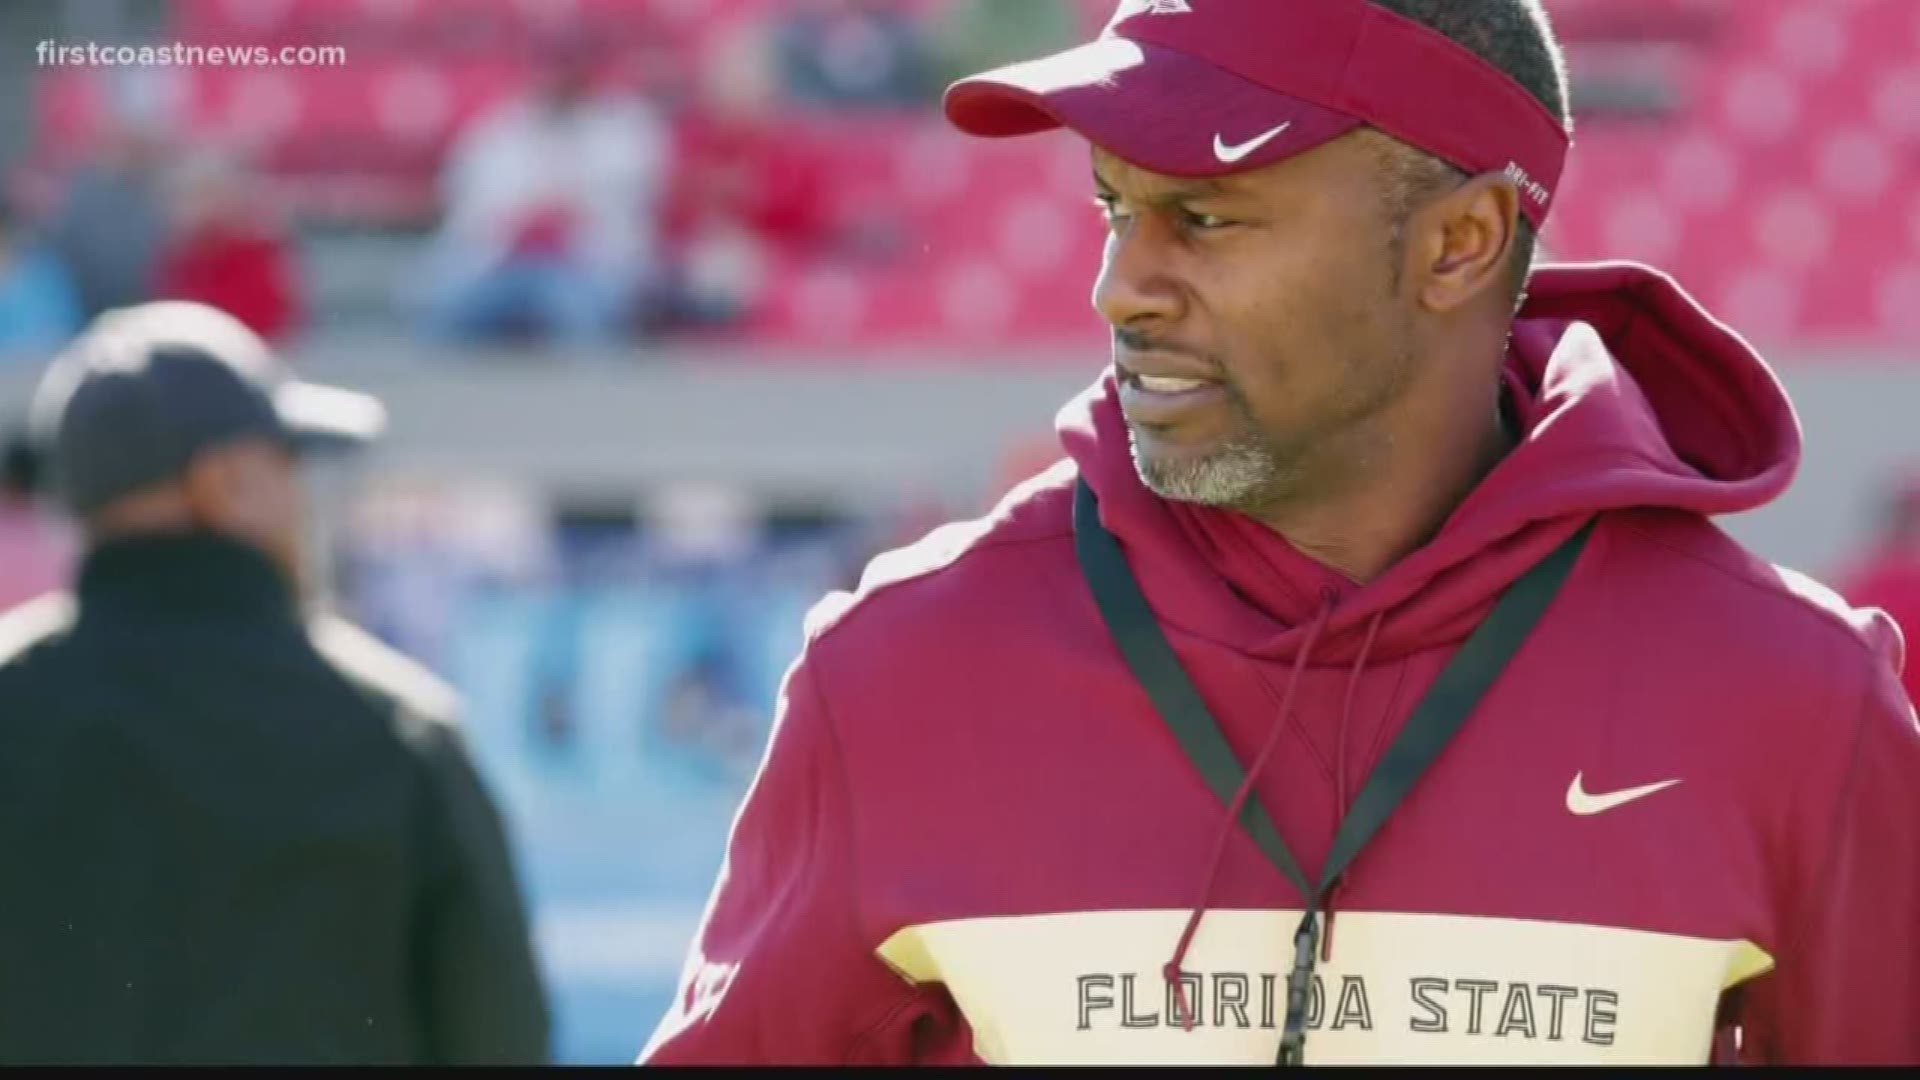 Florida State University hosted a press conference on Monday to discuss the recent firing of head football coach Willie Taggart.